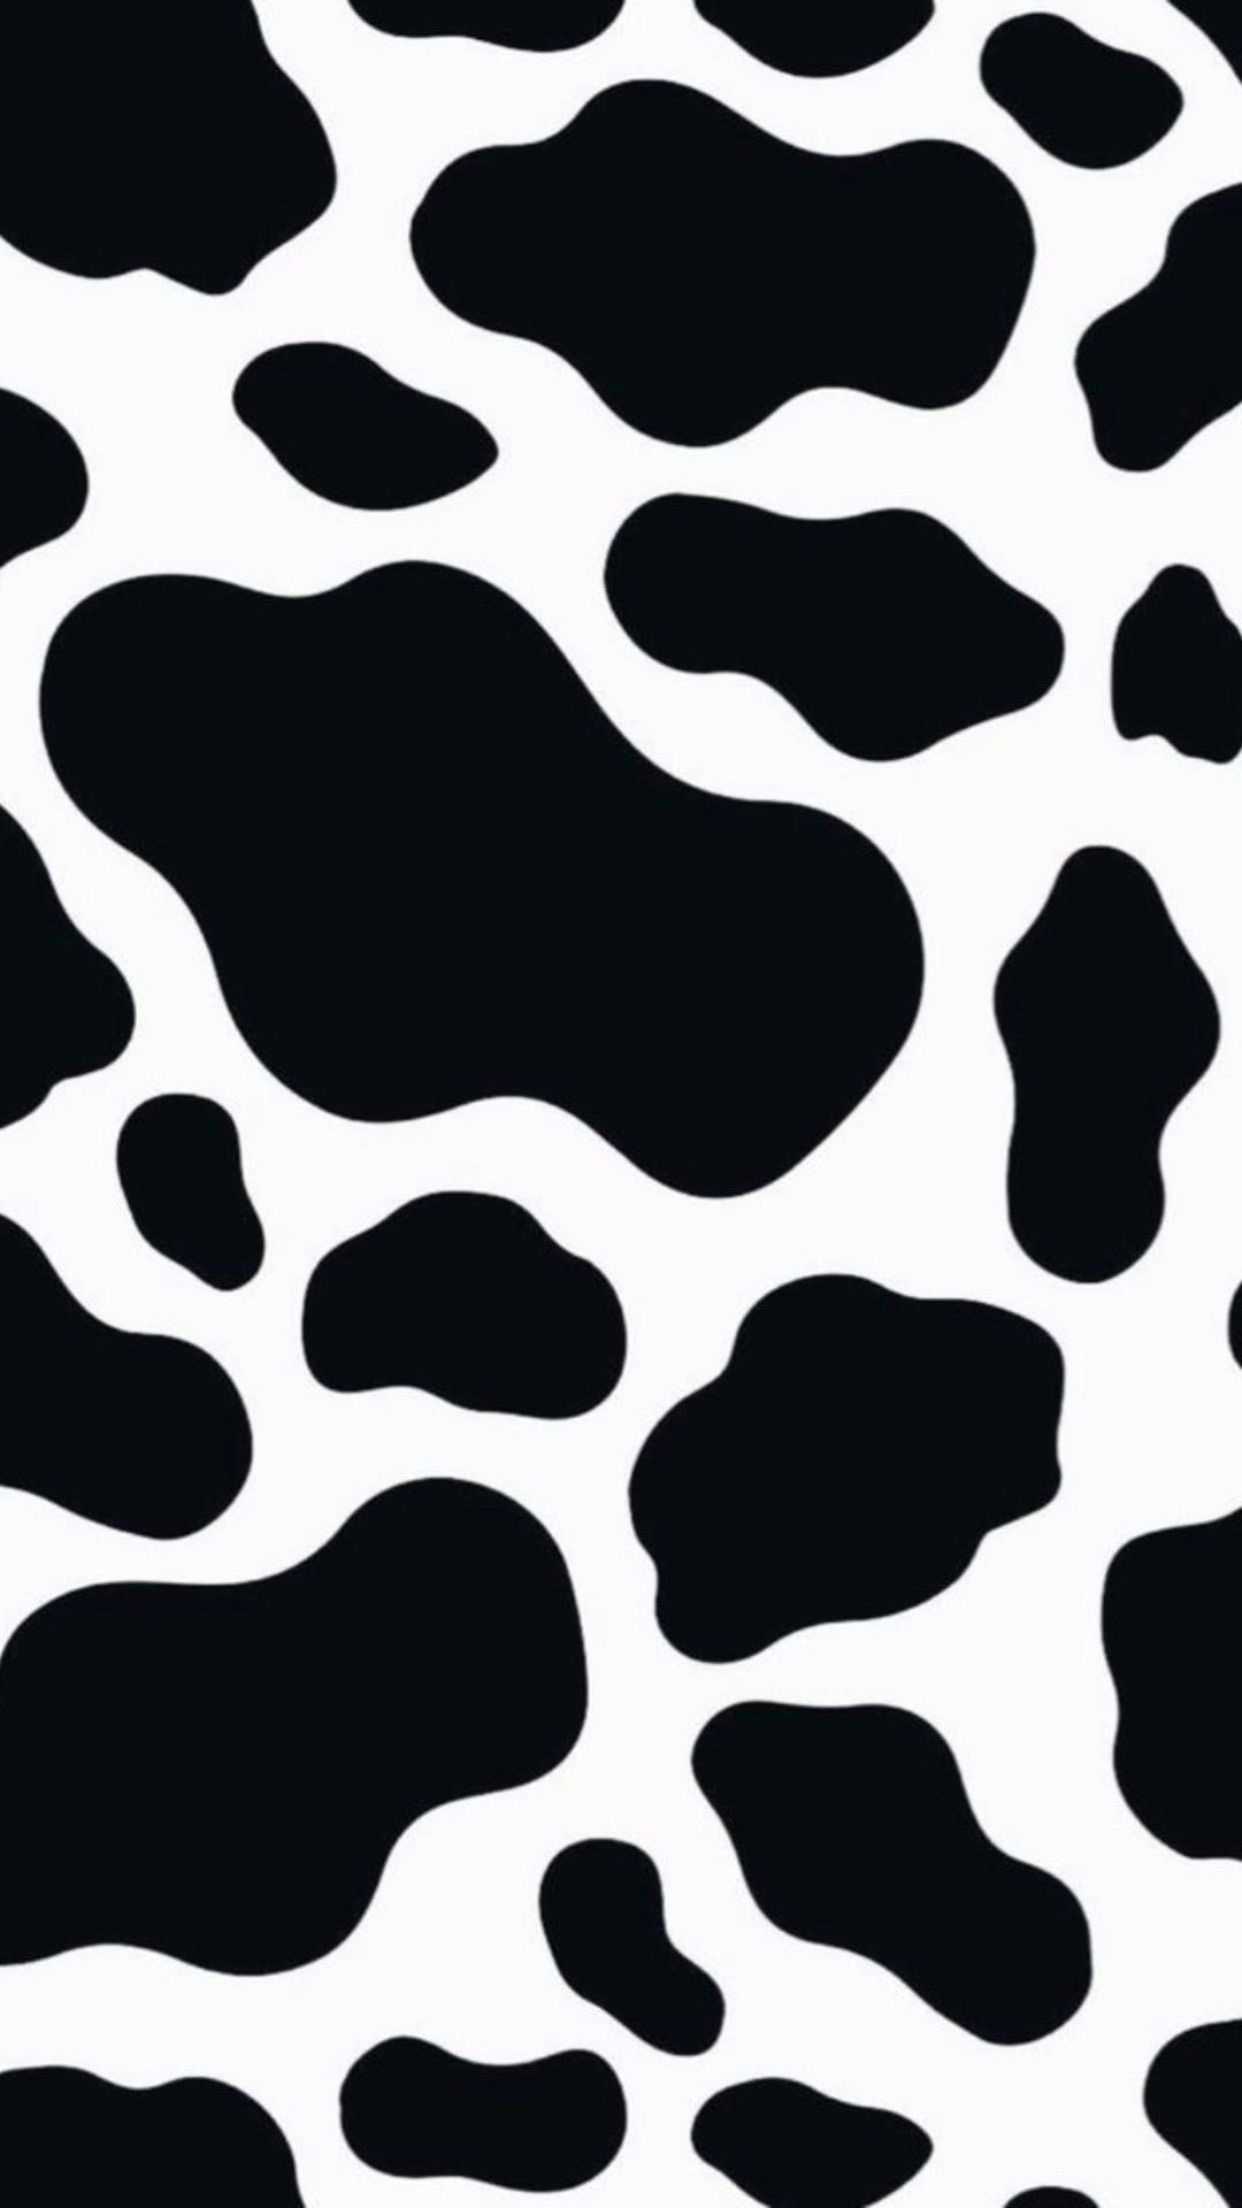 Cute texture of simple white and black cow  Stock Illustration  74860375  PIXTA